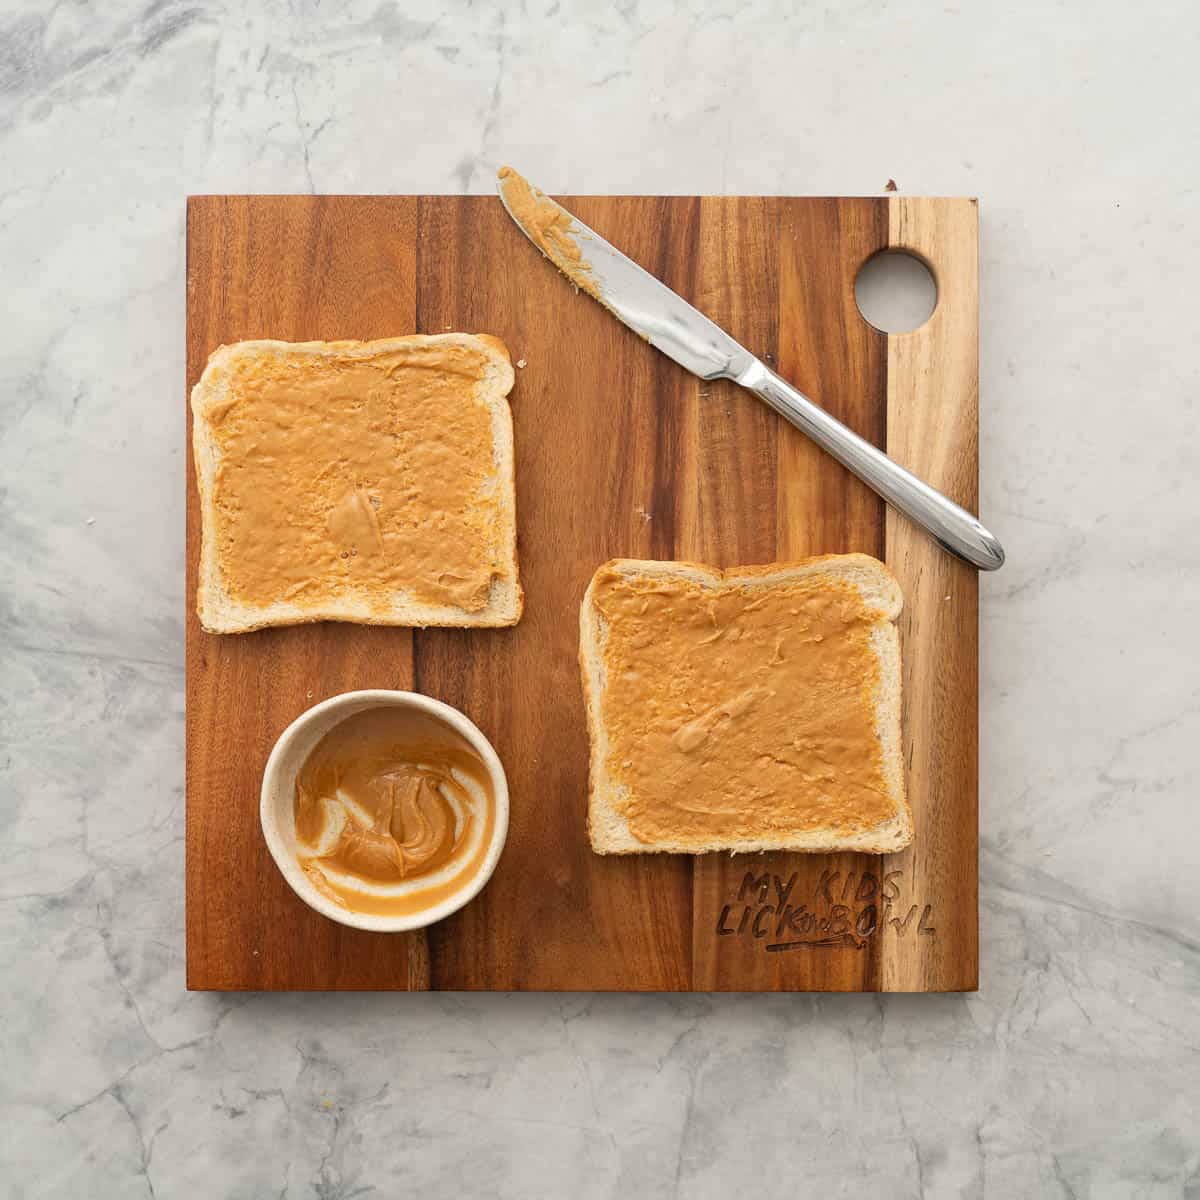 Two slices of bread, spread with peanut butter resting on a wooden chopping board.